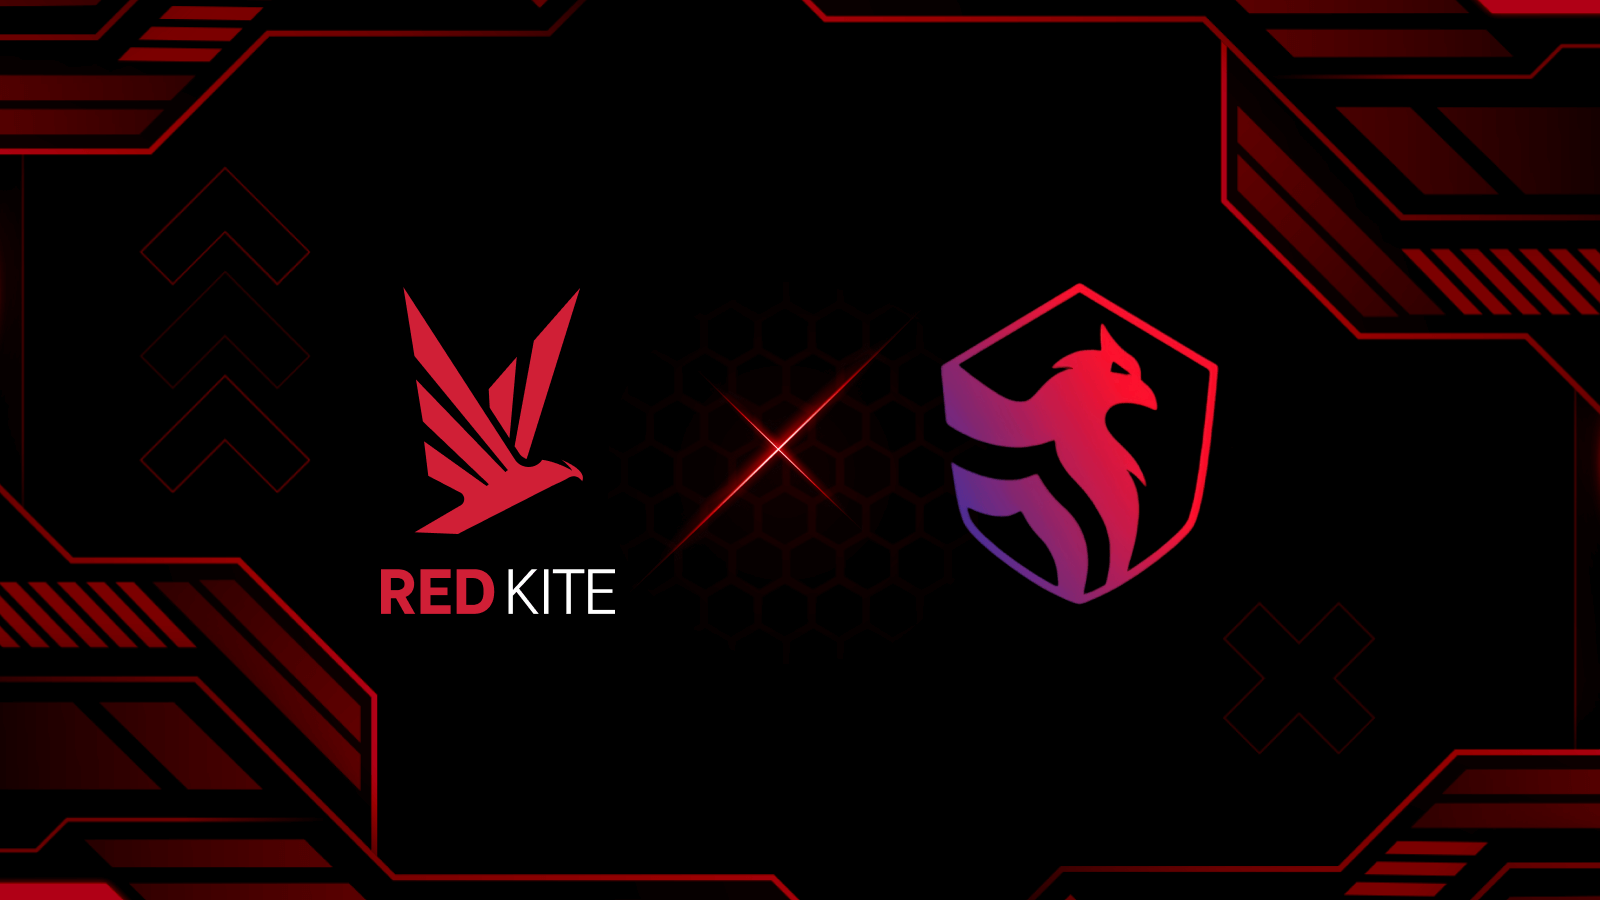 Partnership Announcement: Red Kite and Washi Gaming Guild